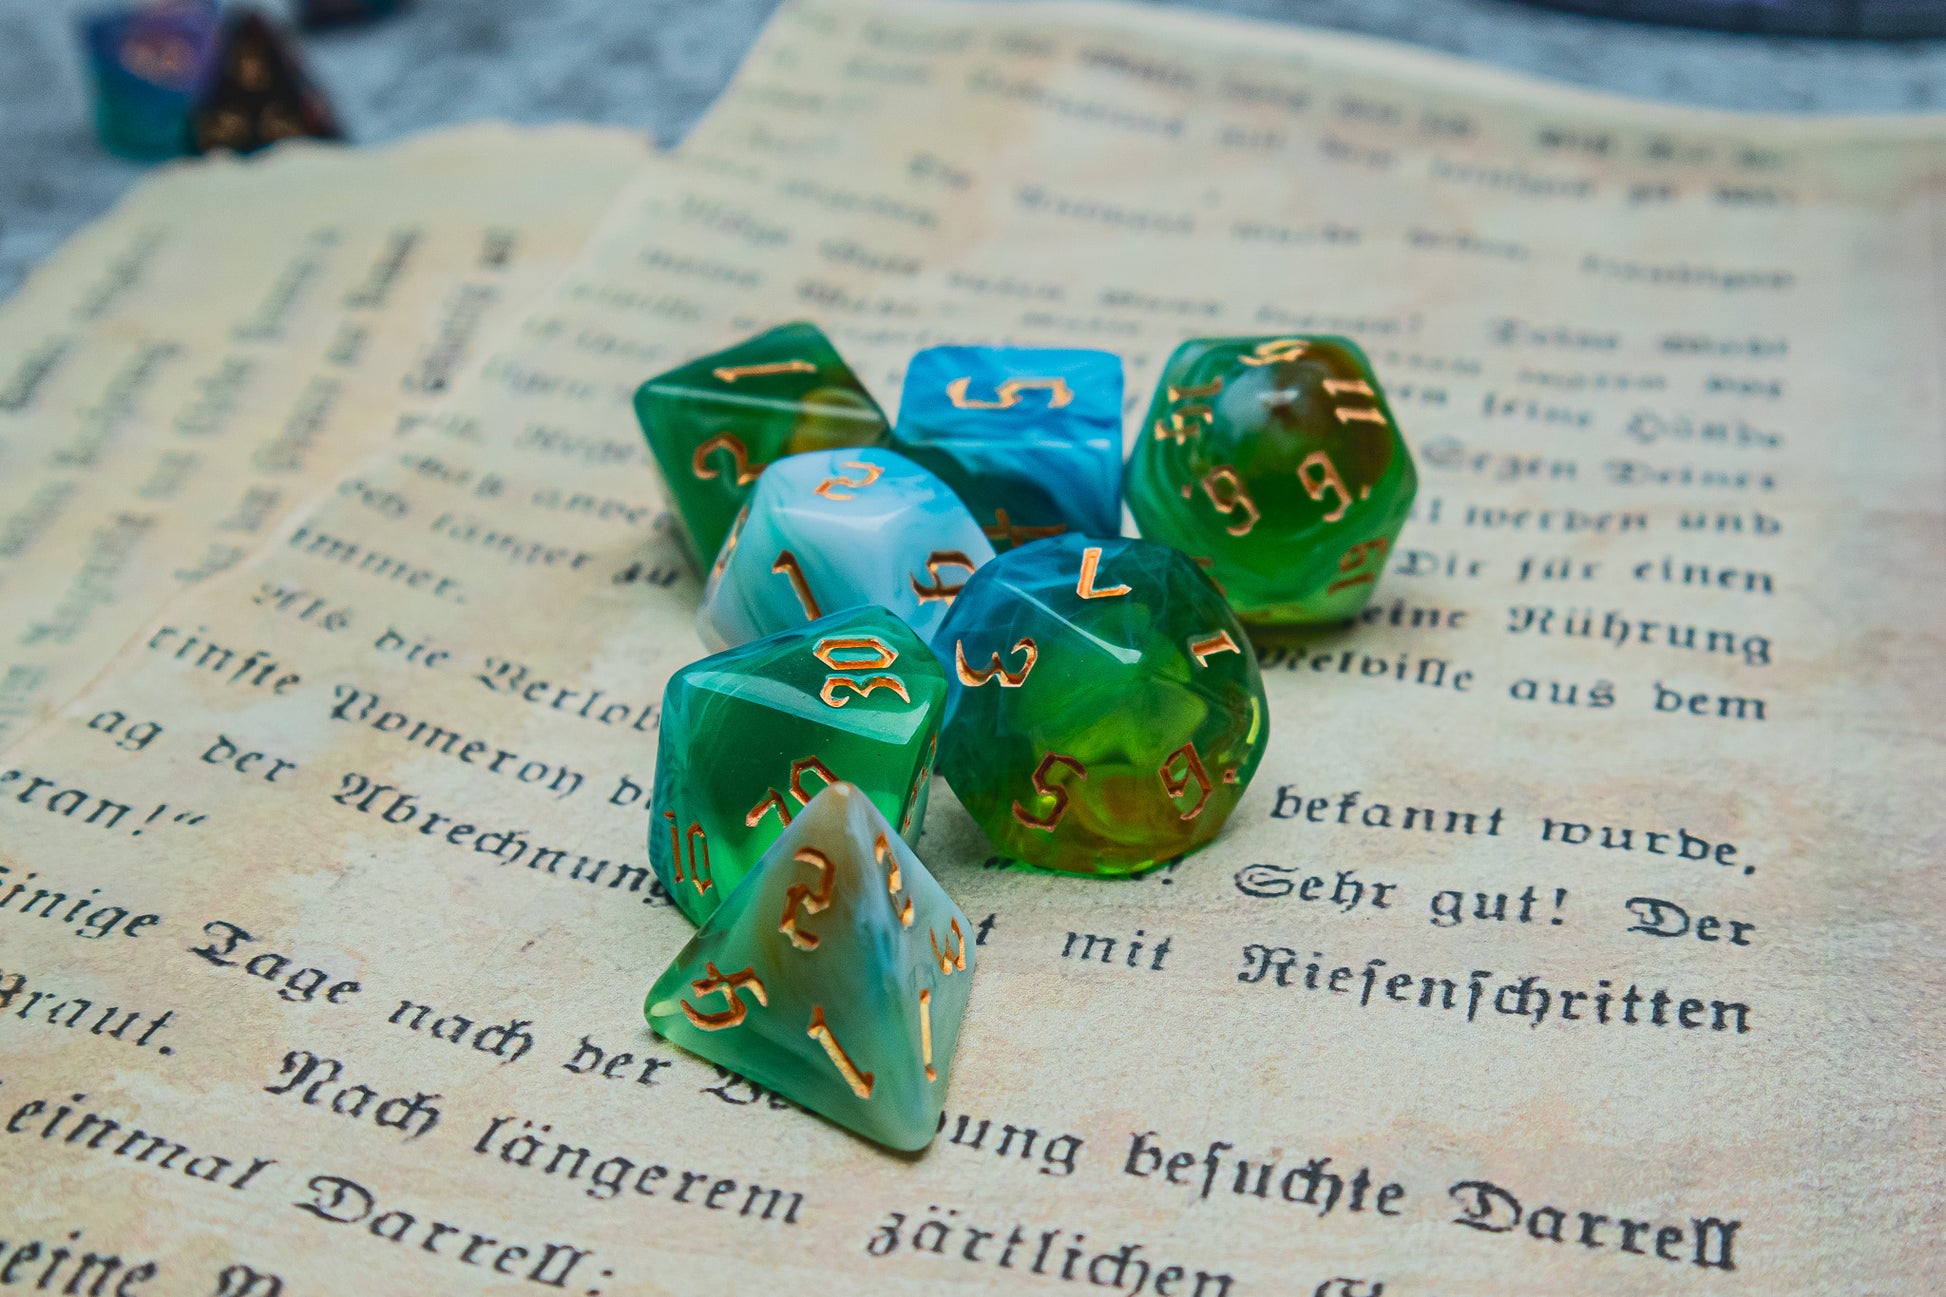 Northern Lights Polyhedral dice set - The Flaming Feather & Flaming Filament